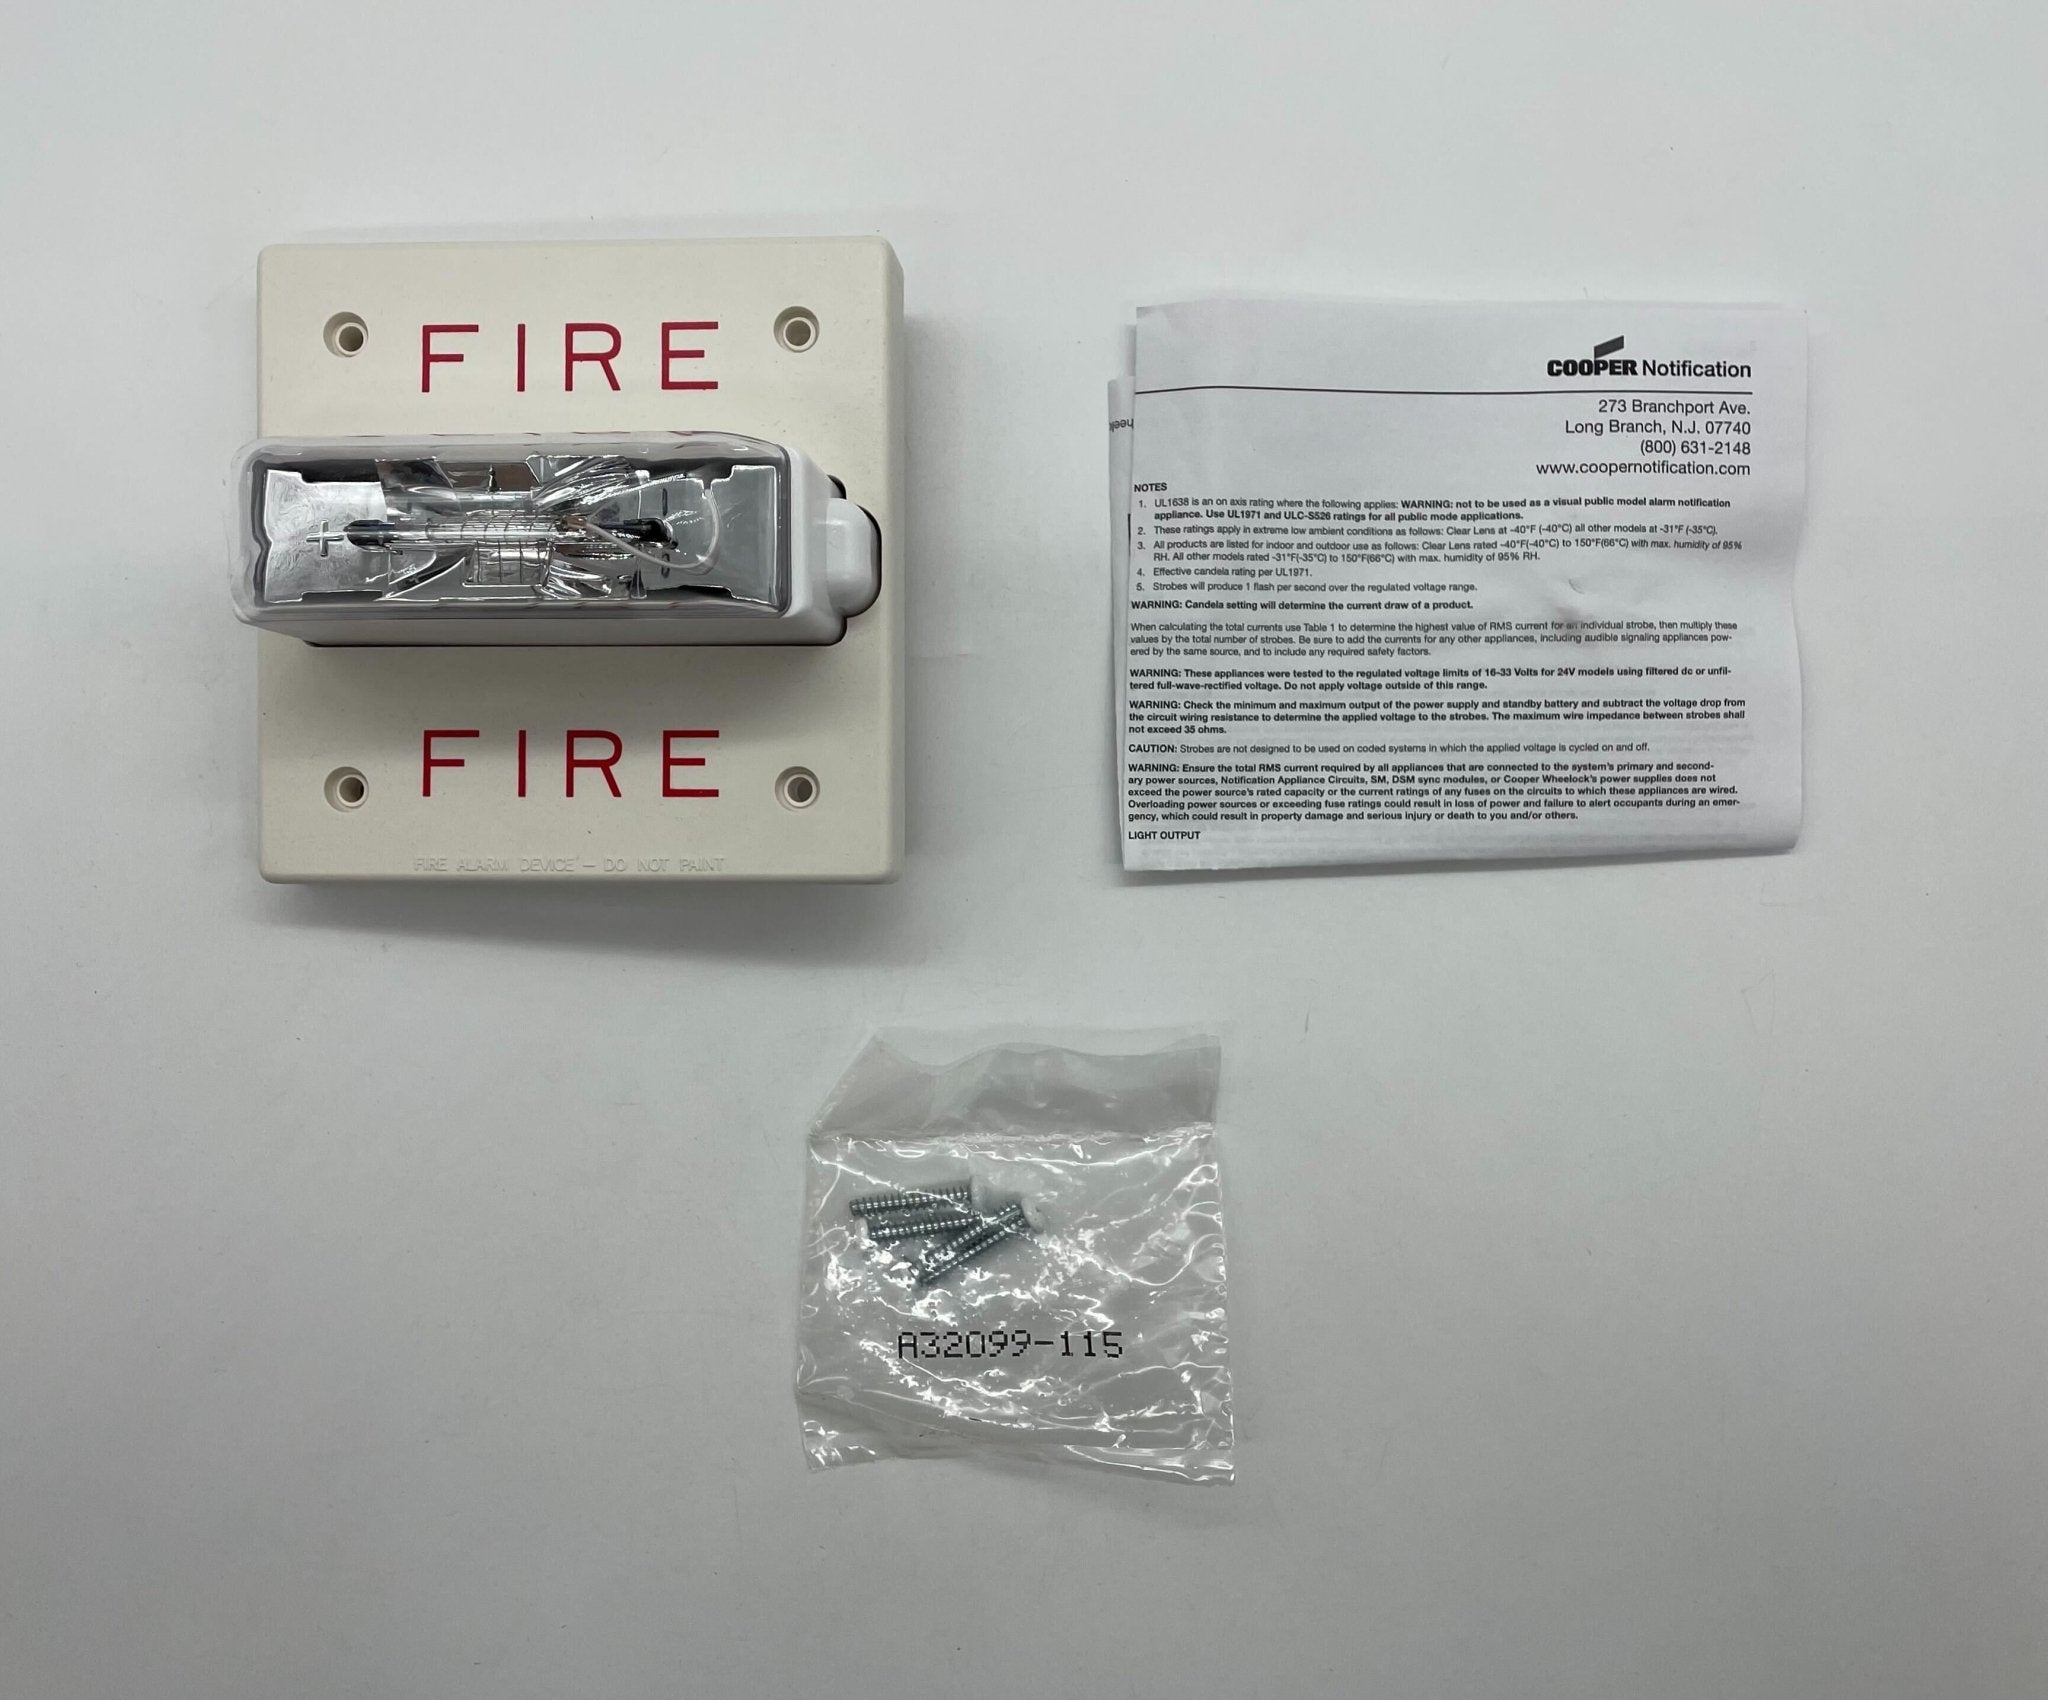 Wheelock RSSWP-24MCWH-FW - The Fire Alarm Supplier